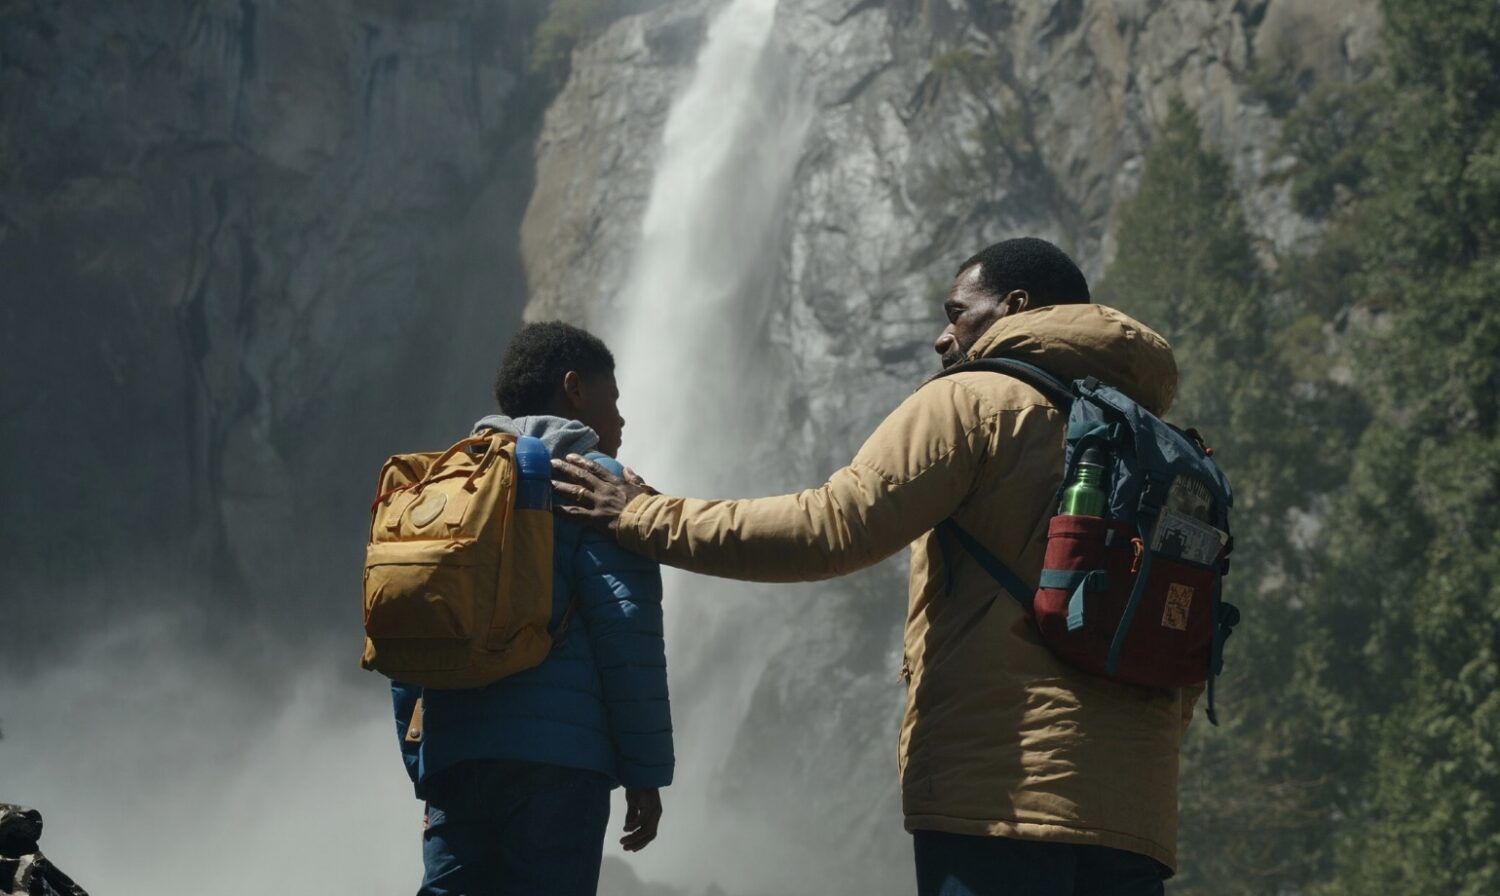 Subaru has released a new advertisement celebrating nature and promoting its partnership with the National Park Foundation.